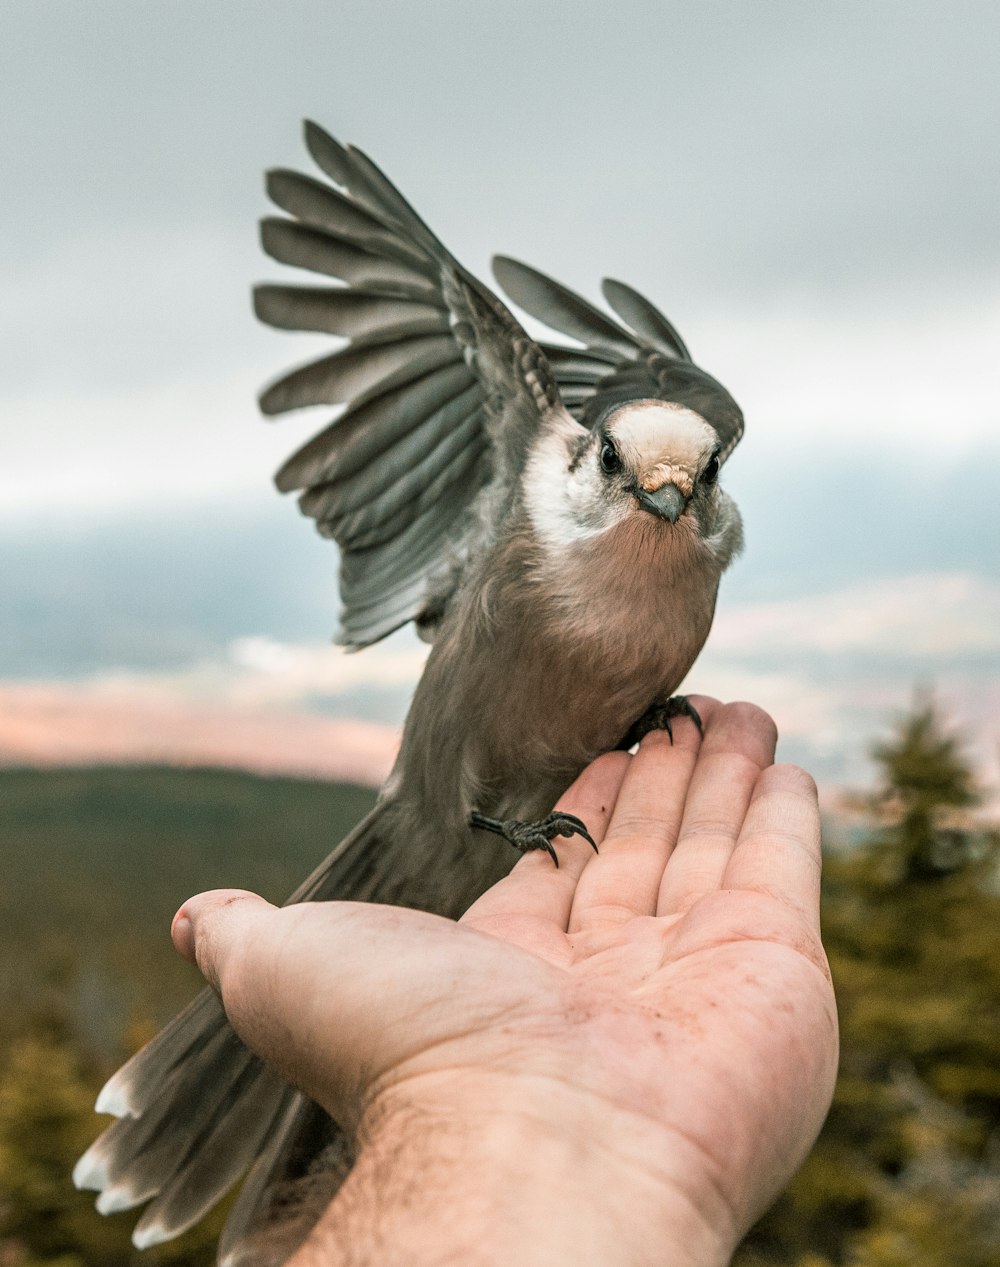 gray bird perched on person's hand